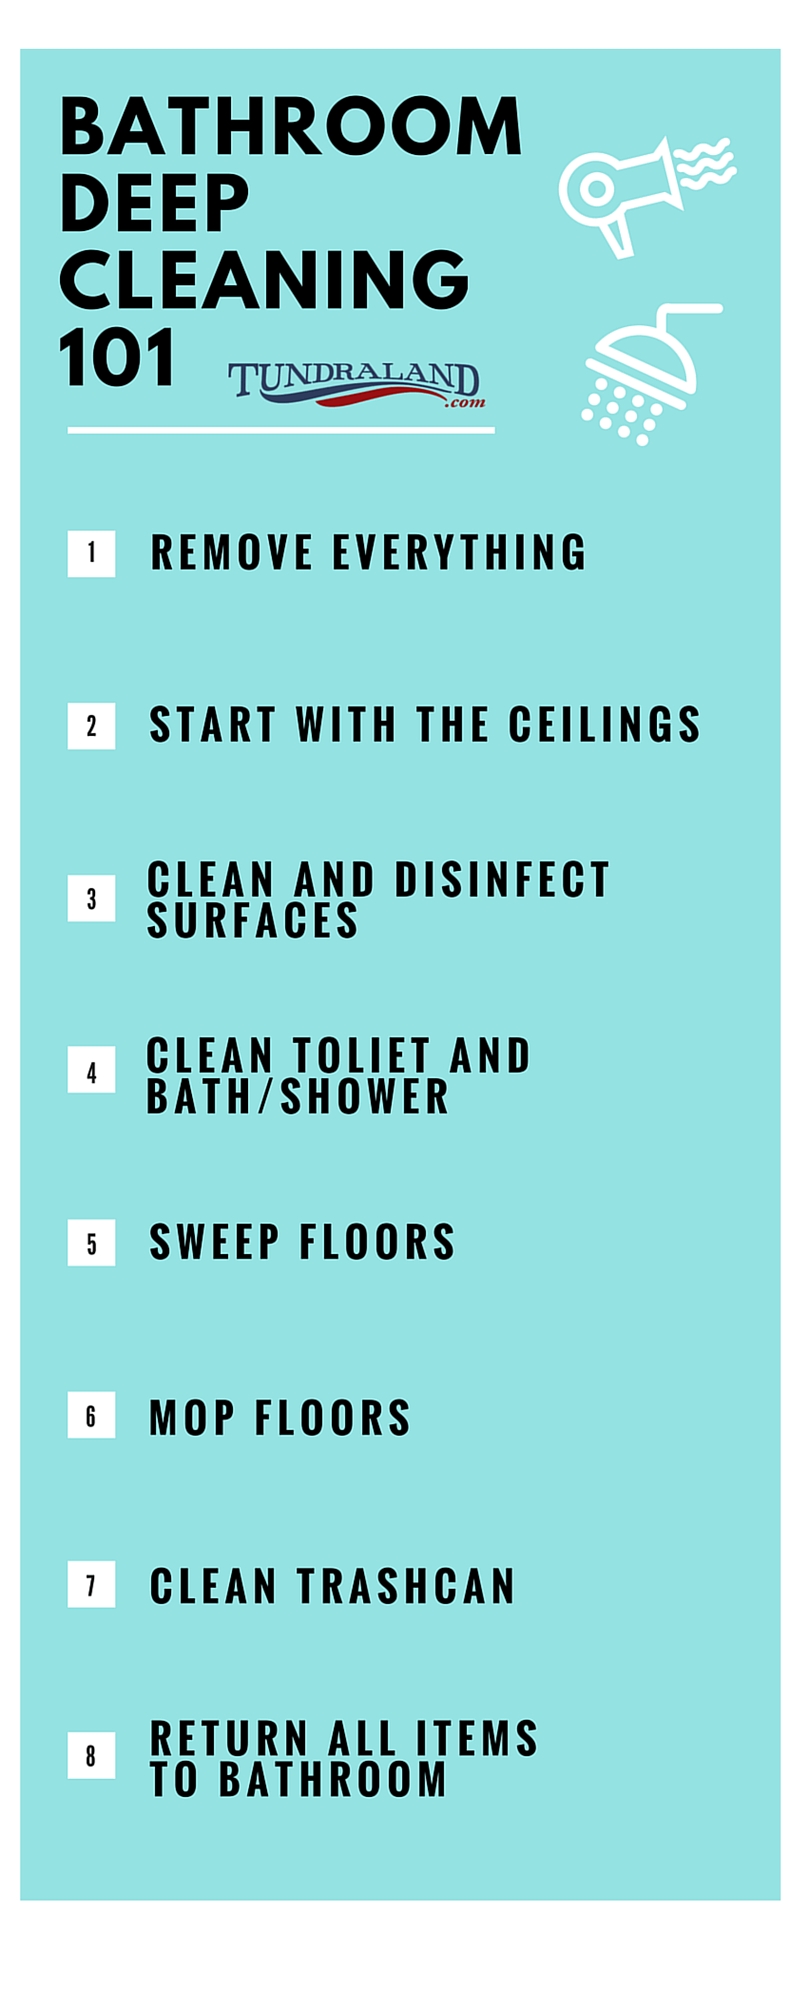 How to Clean a Bathroom in 10 Easy Steps